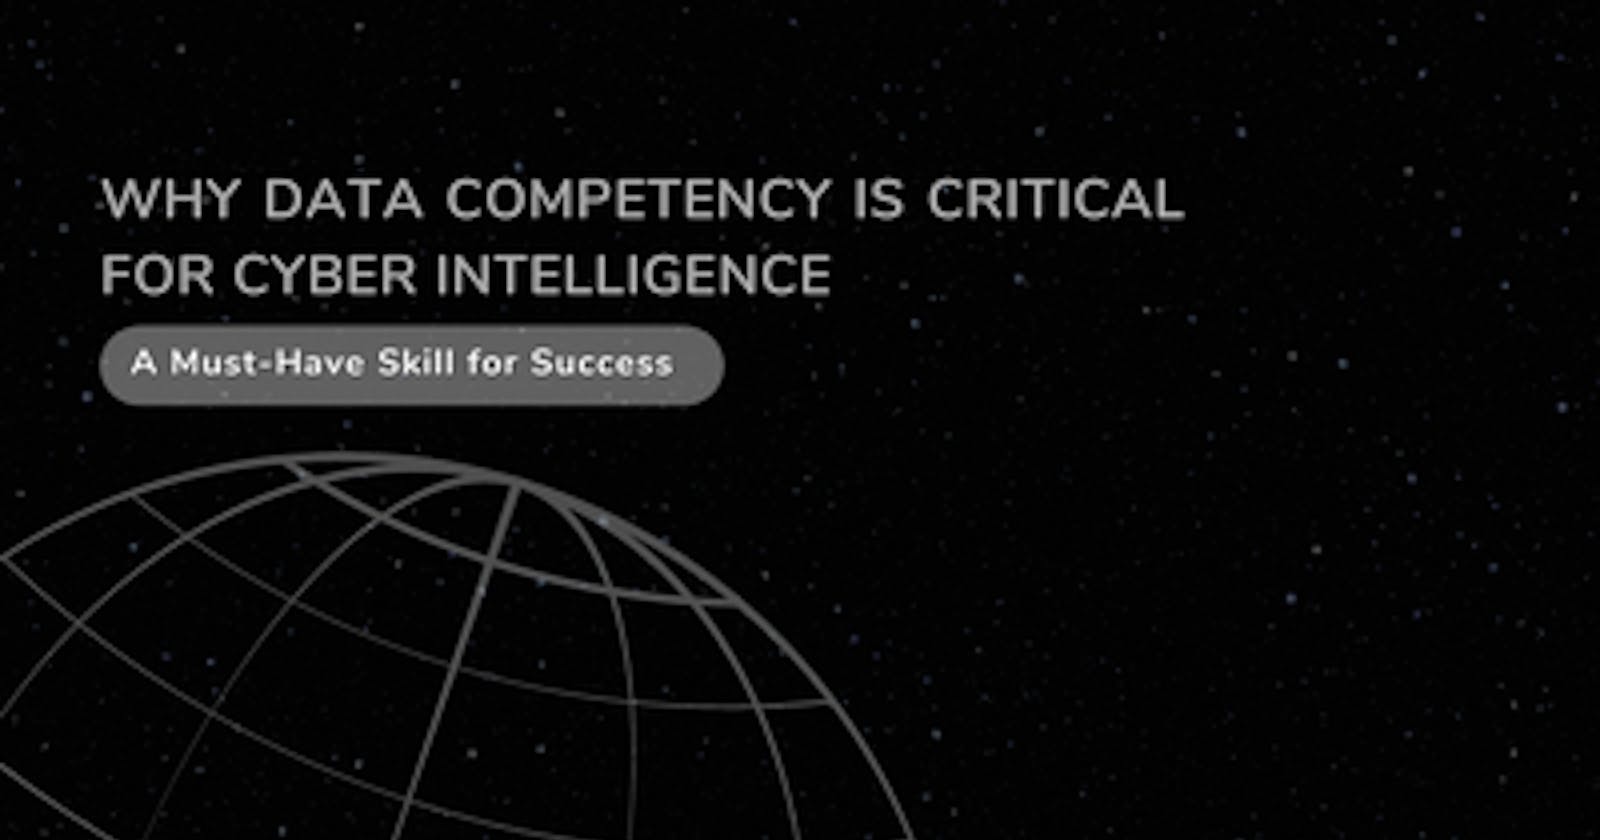 Why Data Competency Is Critical for Cyber Intelligence